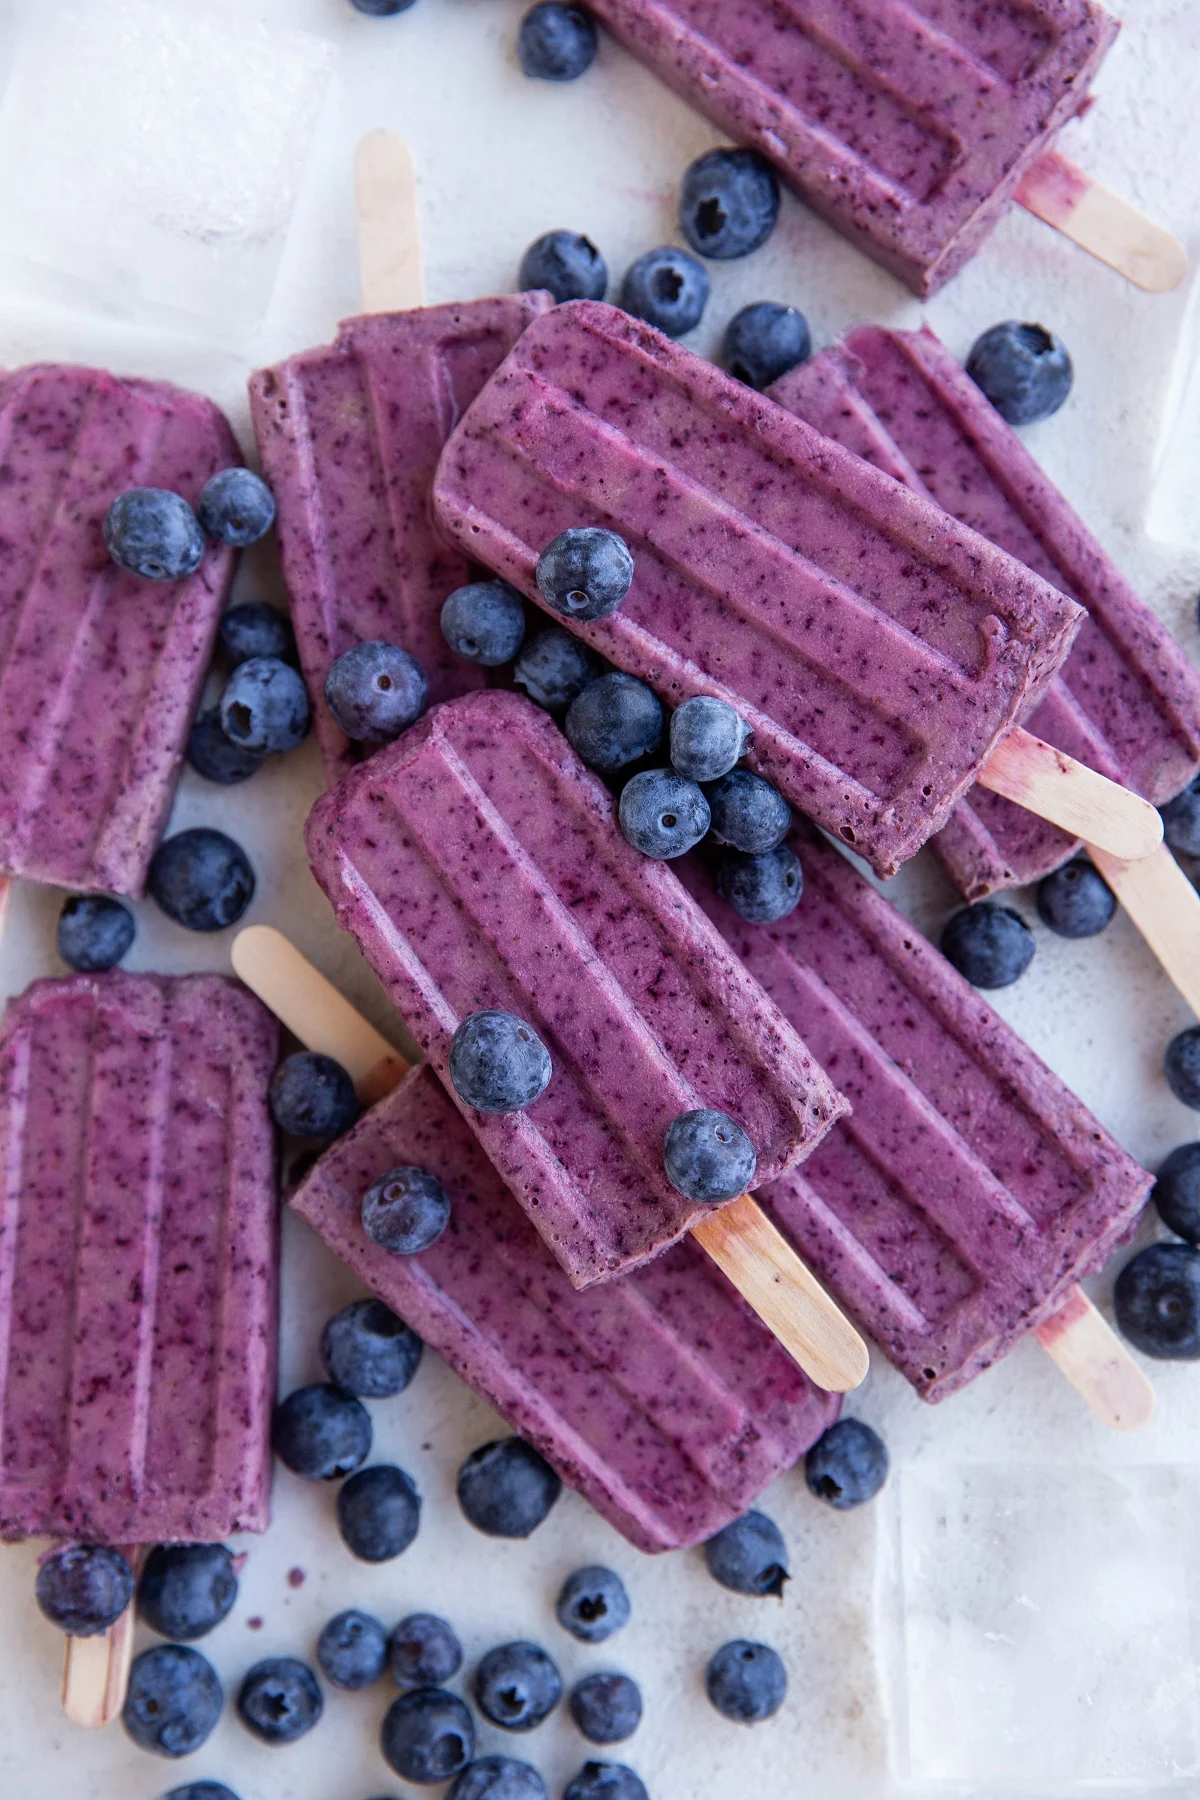 Pile of blueberry coconut milk popsicles on a white background with ice and fresh blueberries all around.